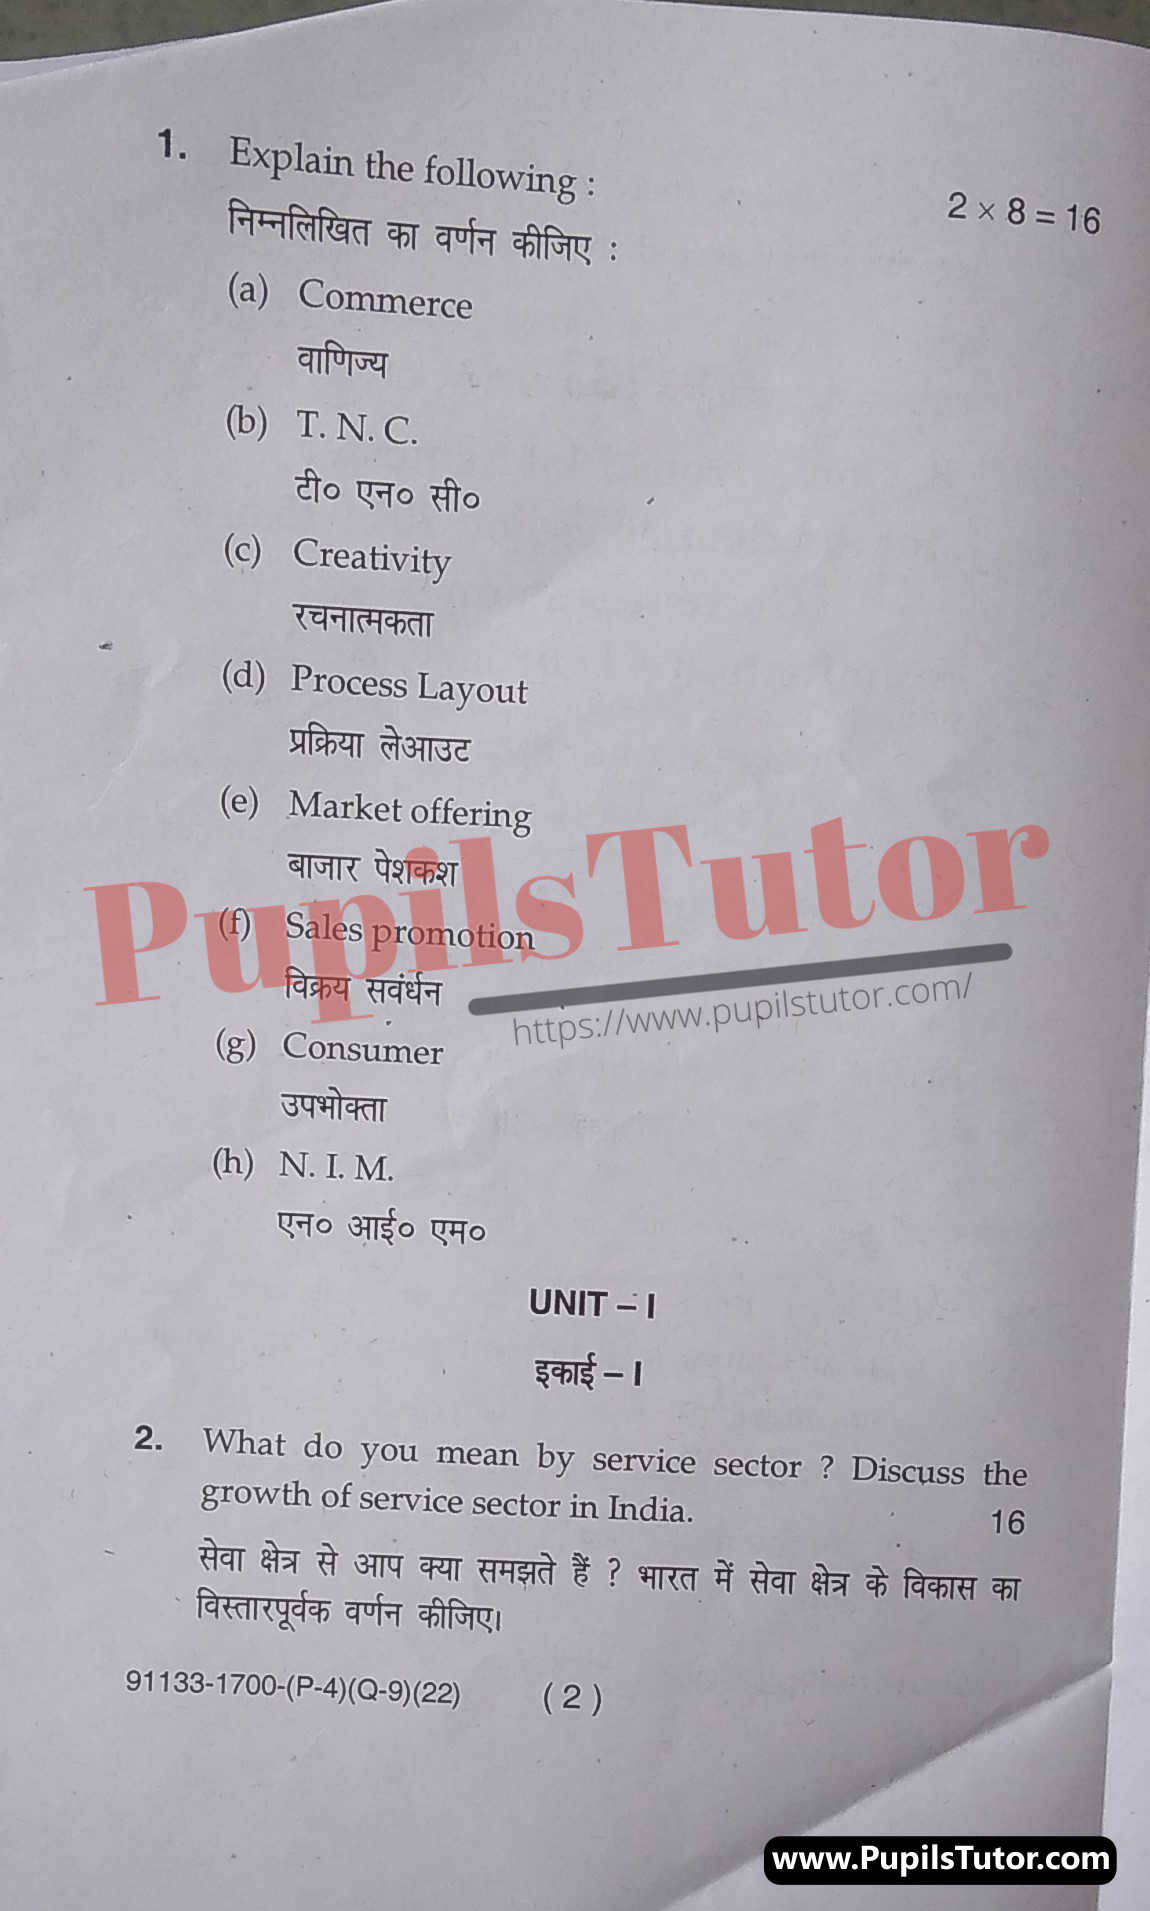 M.D. University B.Com. Business Organisation First Semester Important Question Answer And Solution - www.pupilstutor.com (Paper Page Number 2)